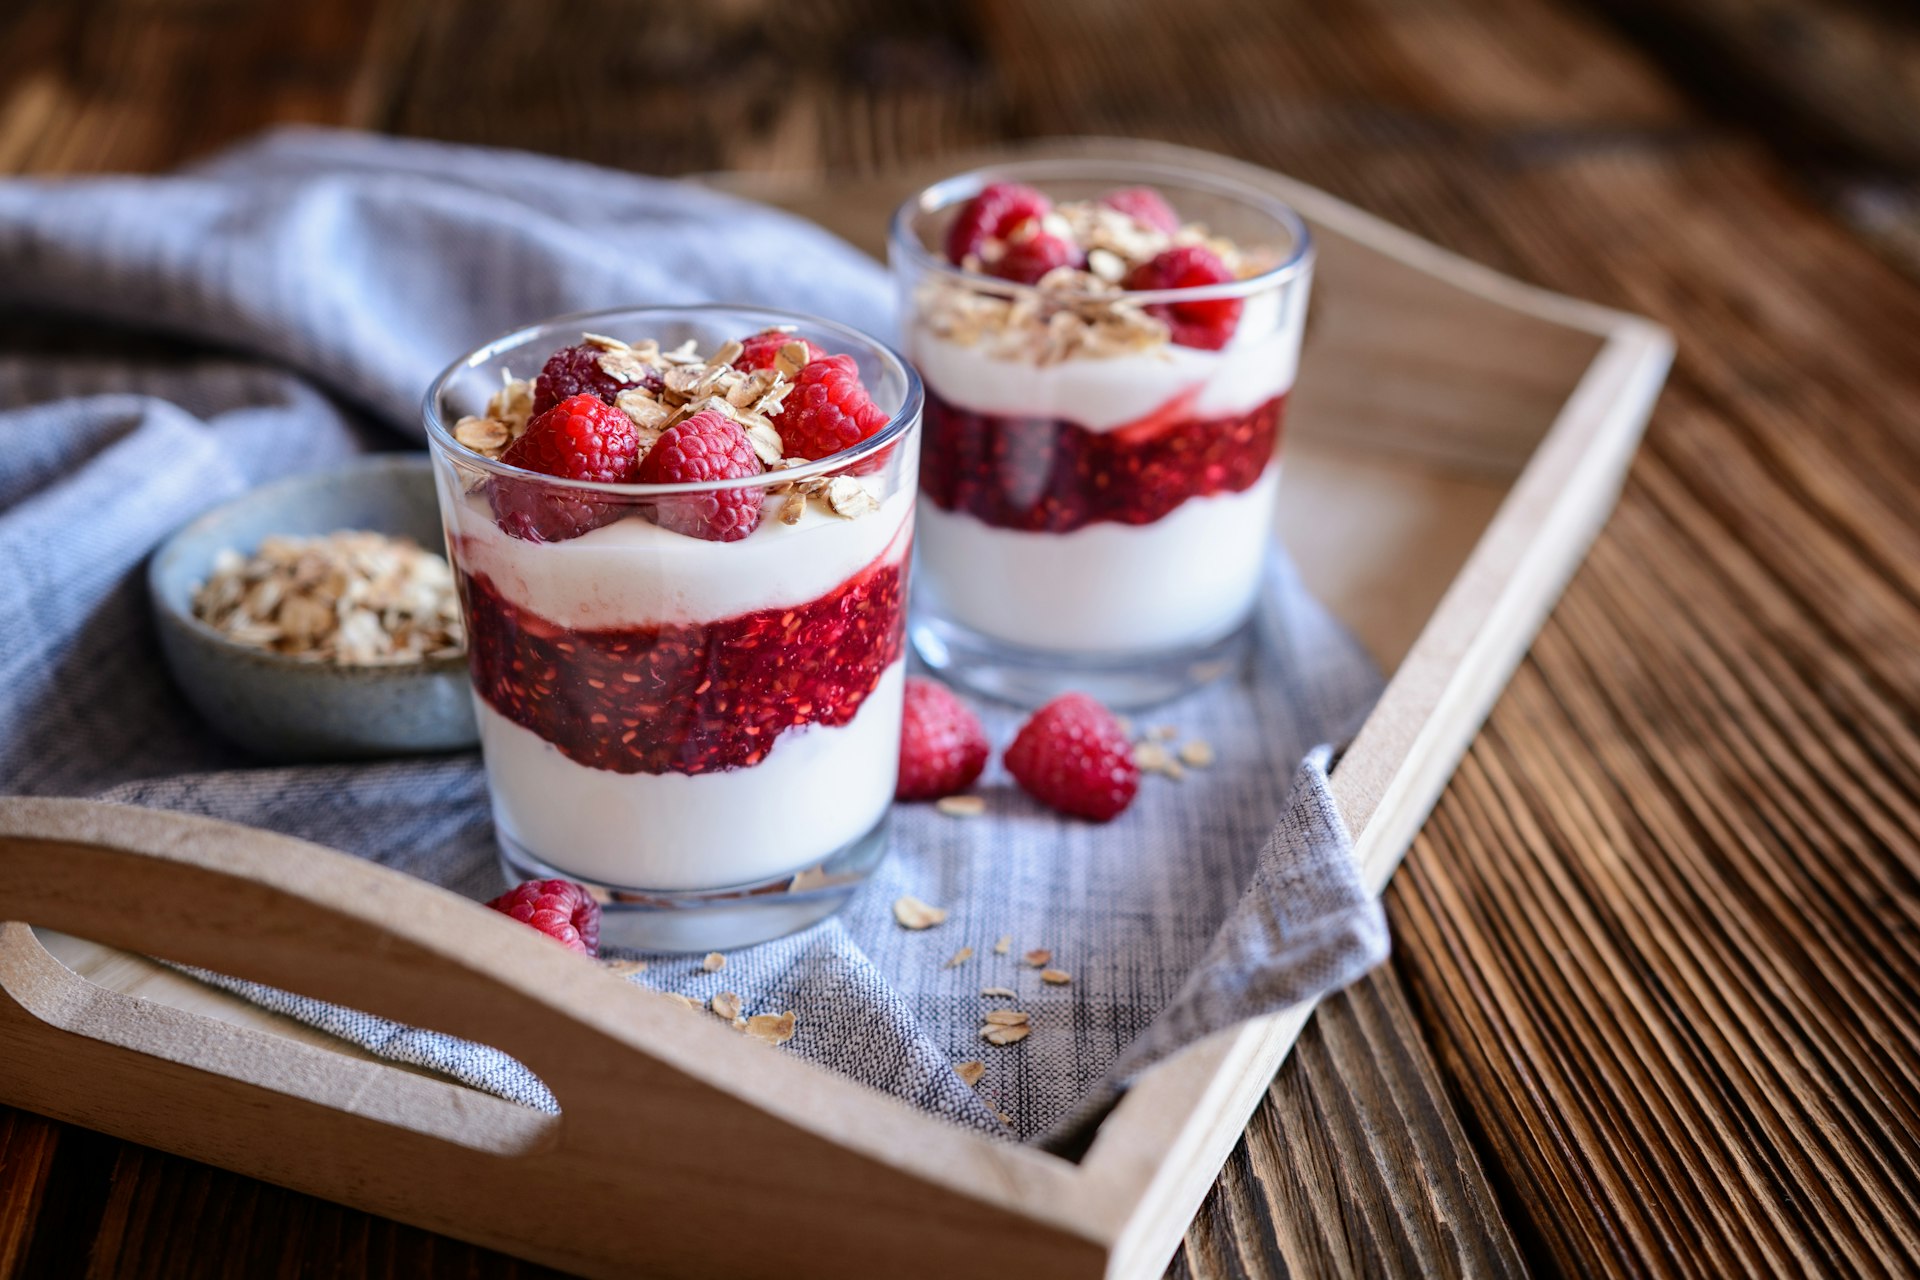 A pair of short glasses layered with whipped cream, roasted oatmeal and raspberries. The dessert is topped with strawberries. 